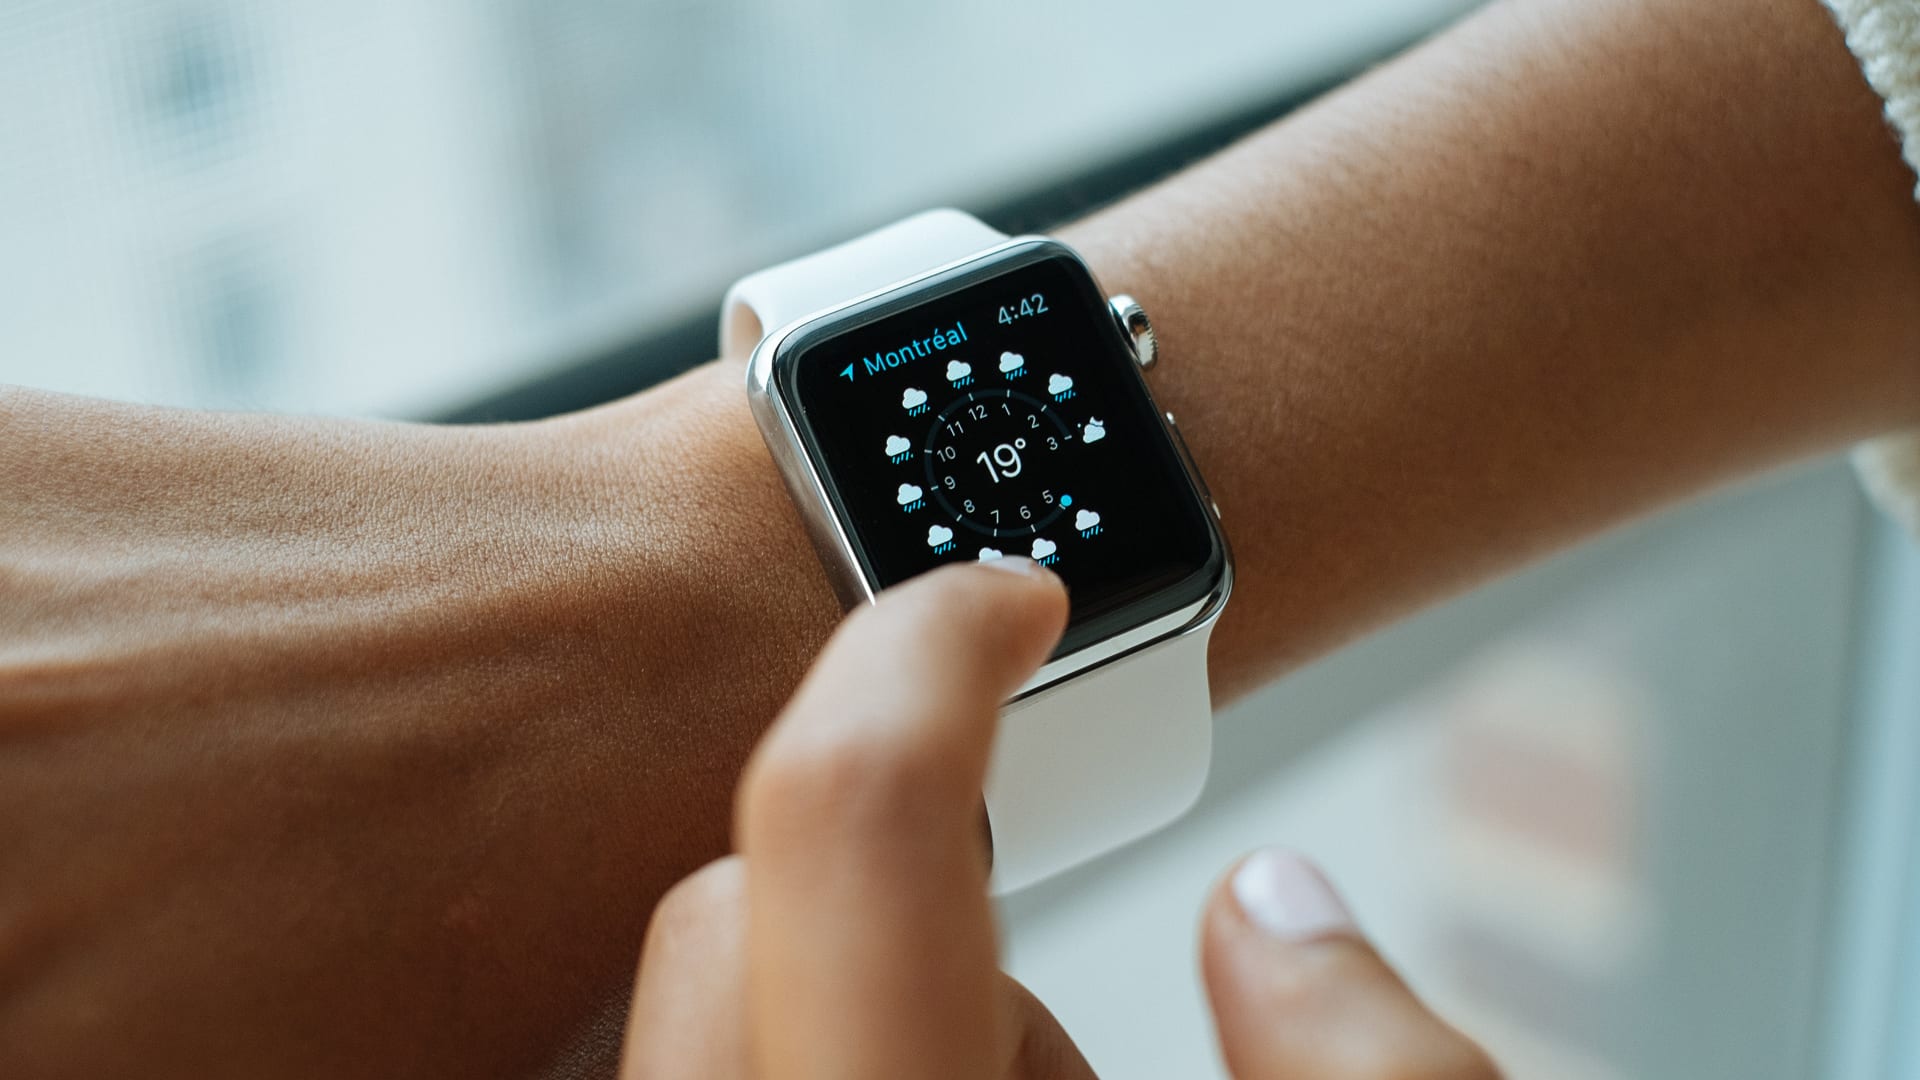 Users: Apple Watch is getting sick at the hospital